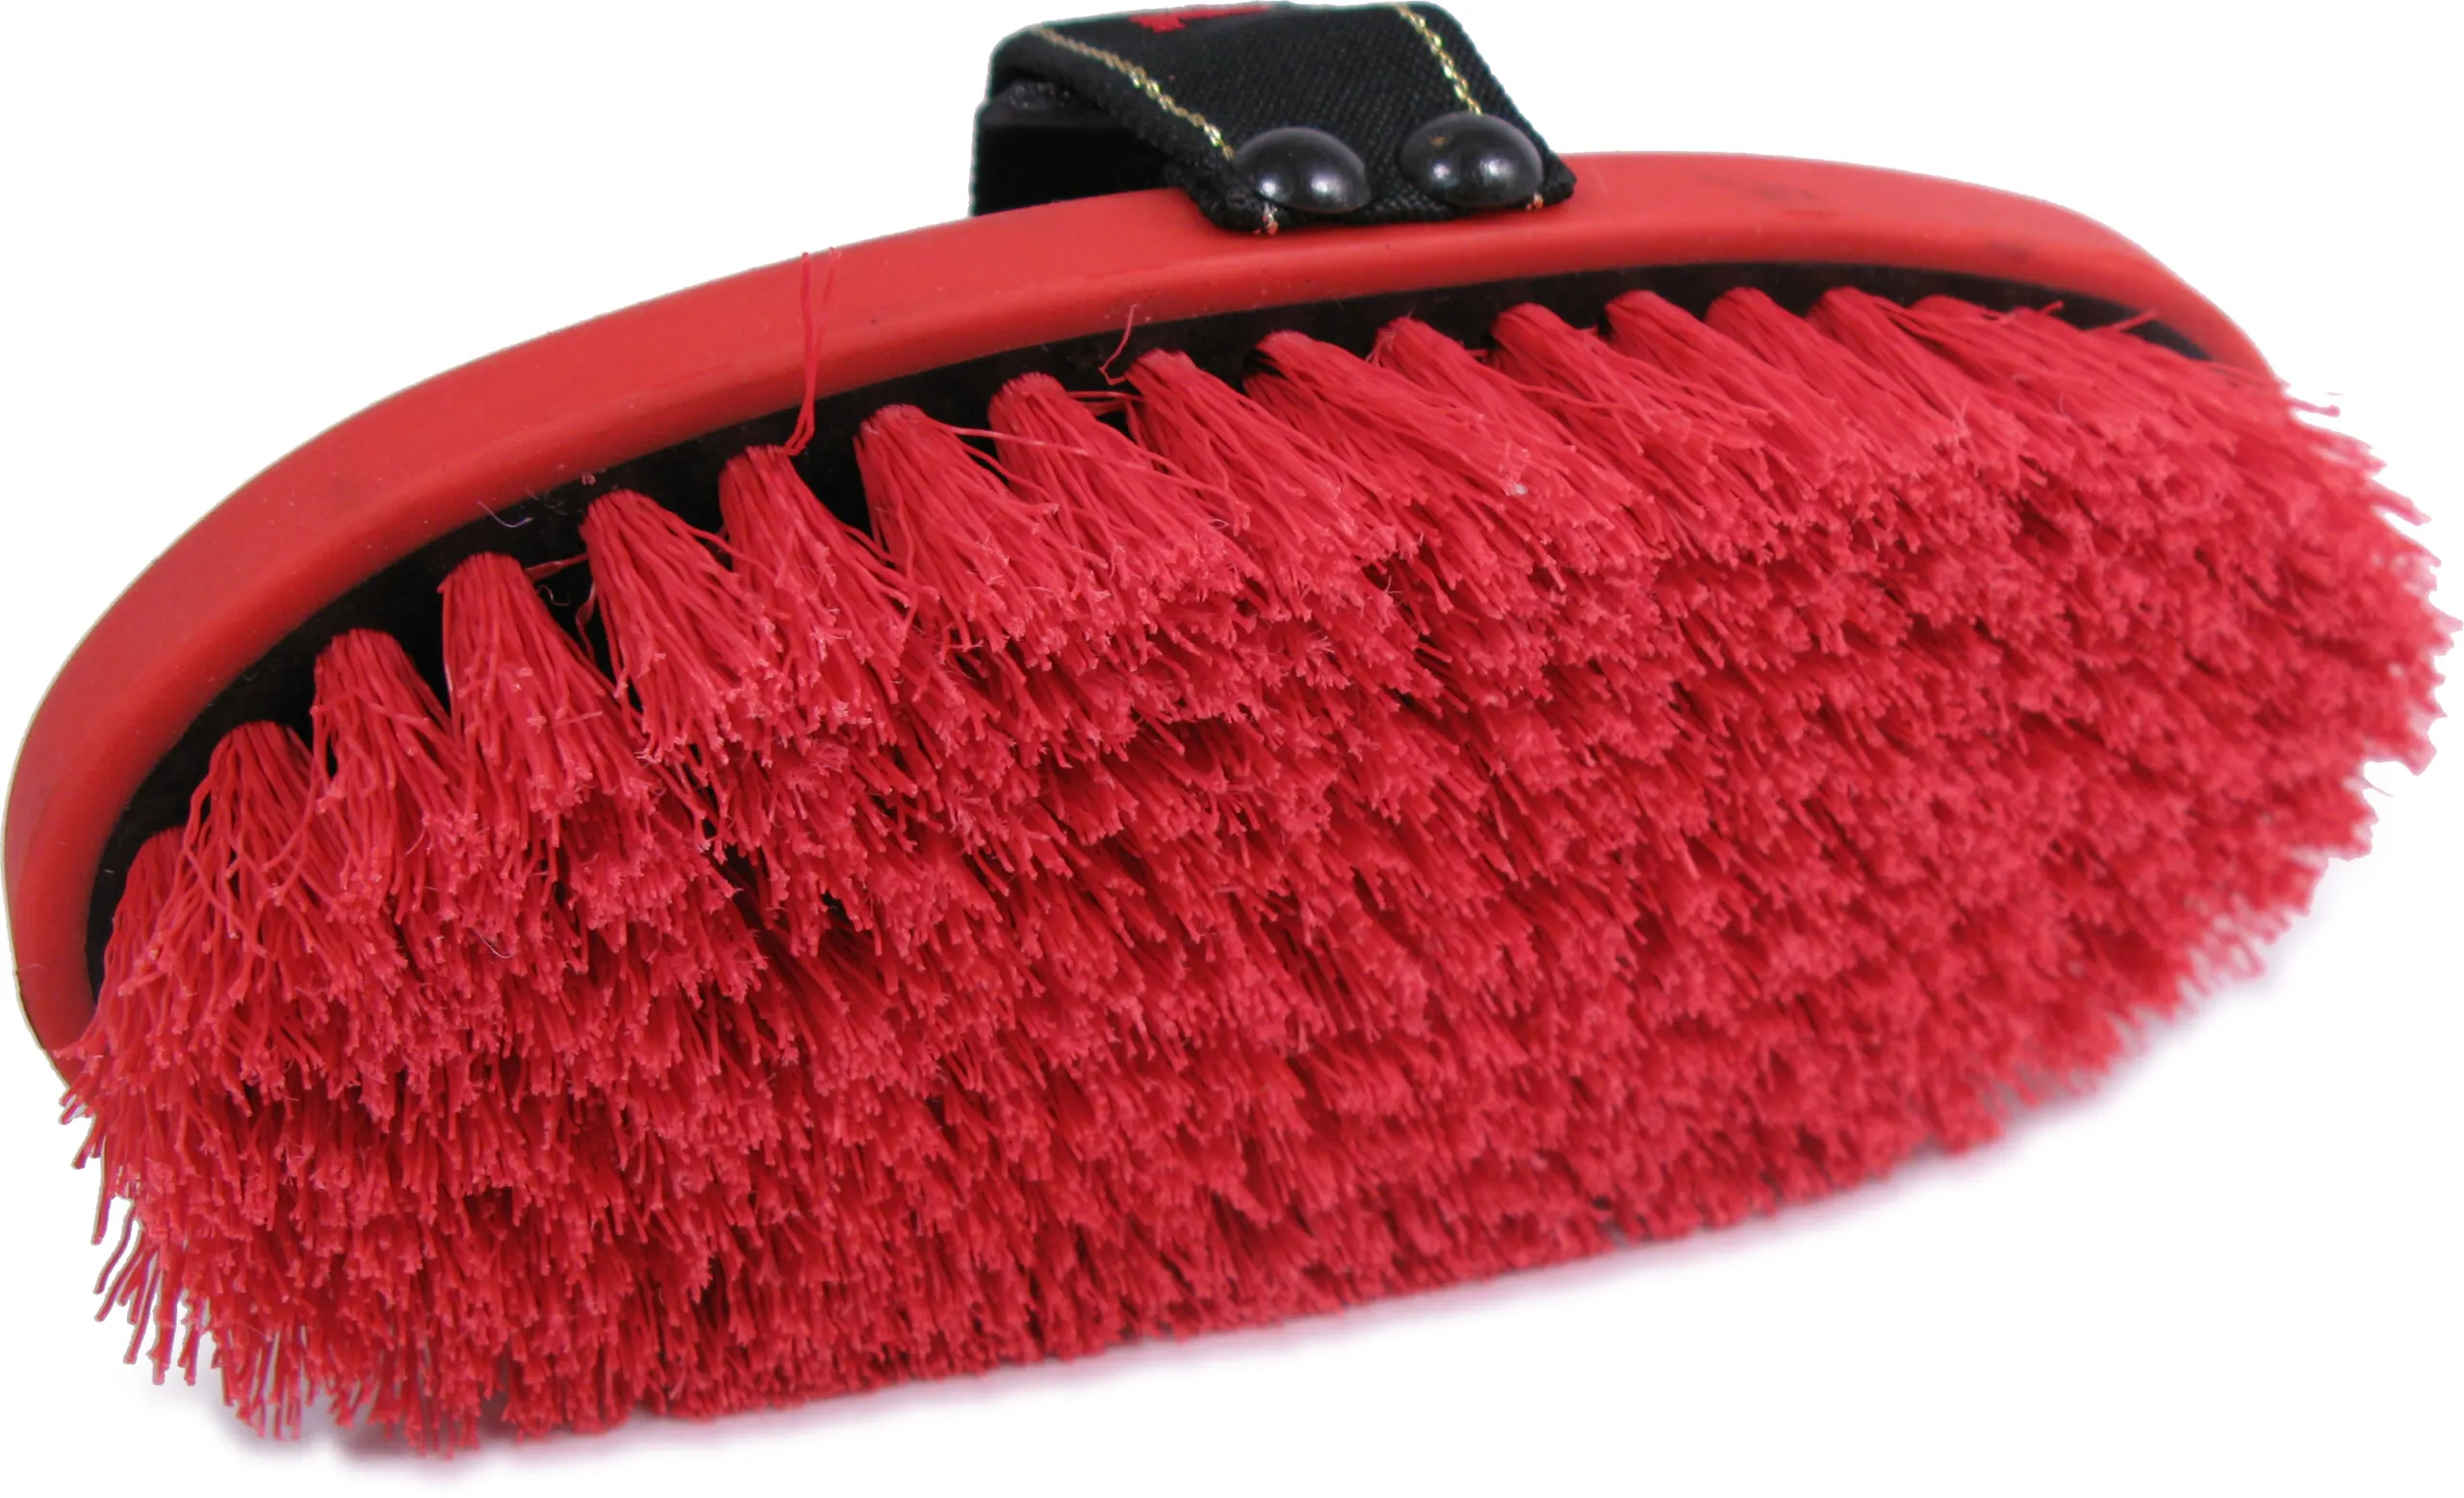 A red horse brush.